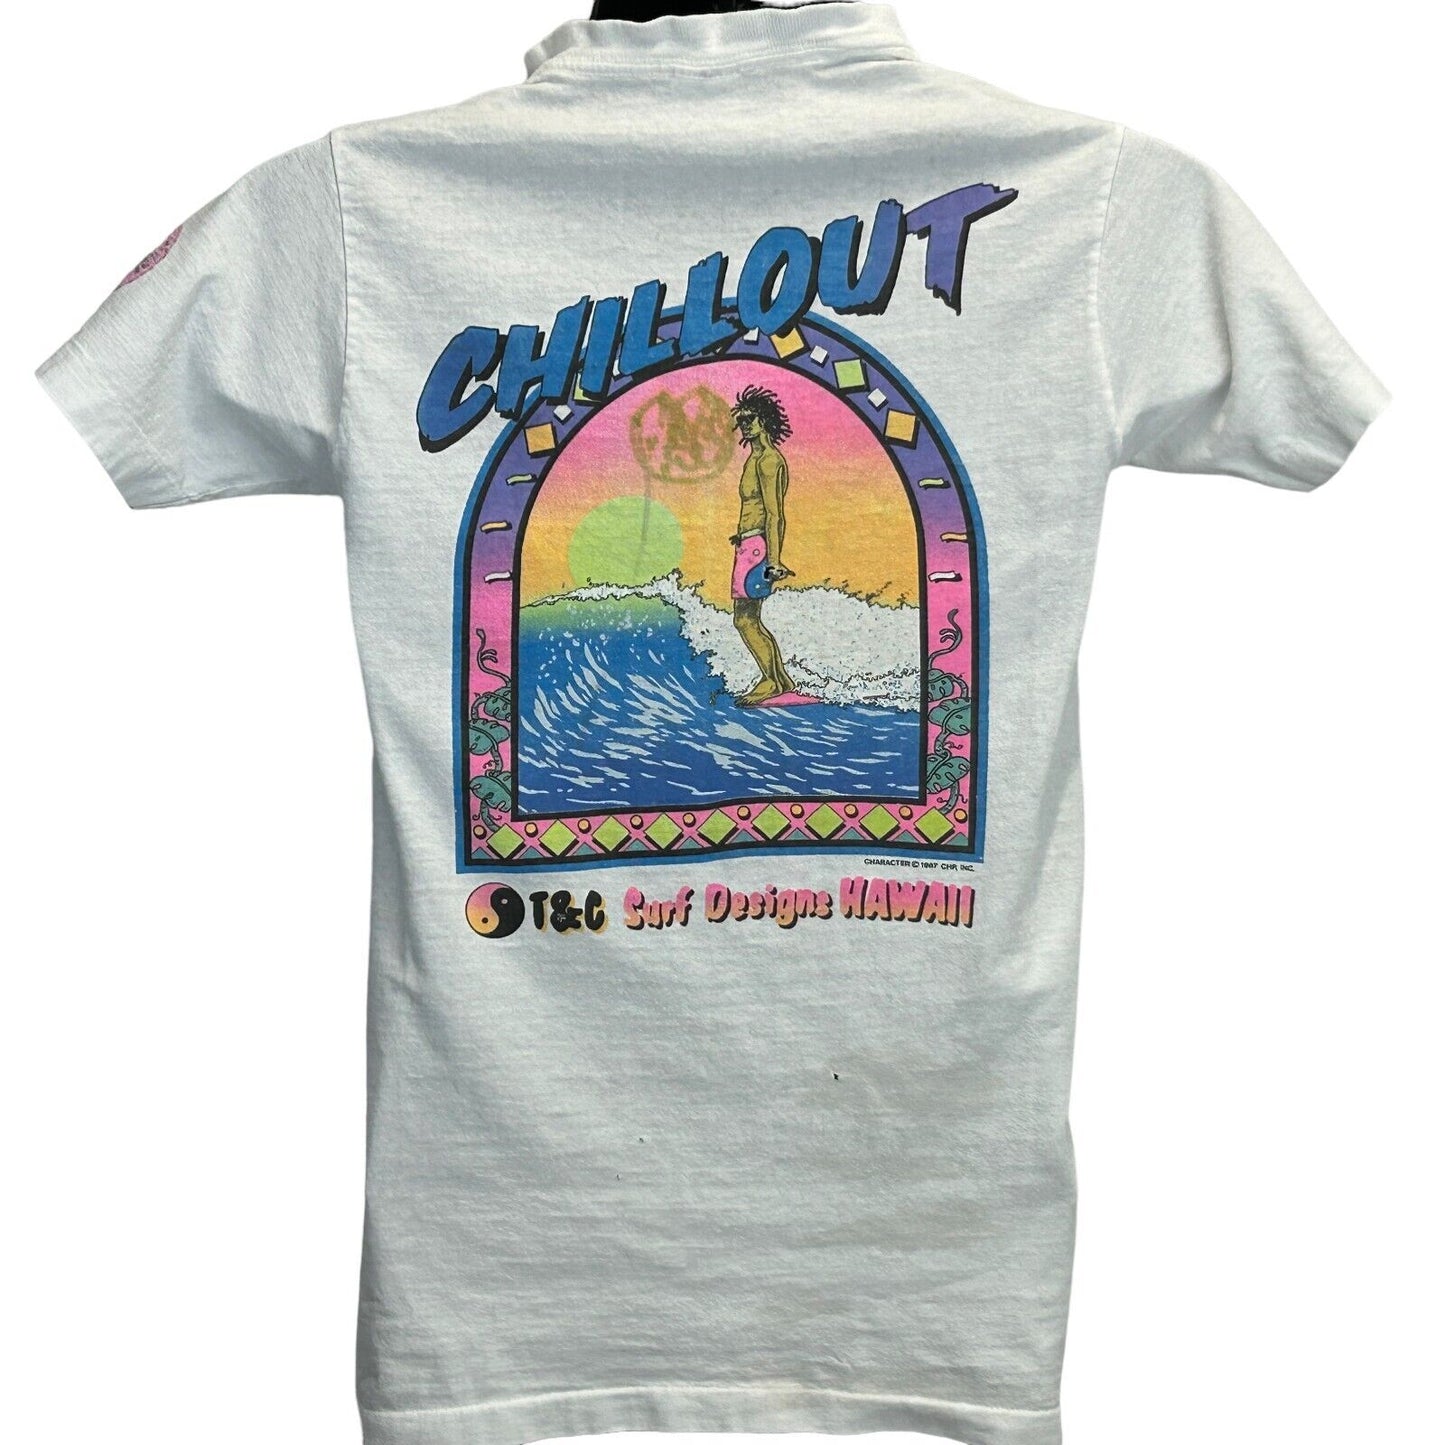 T&C Surf Designs Vintage 80s T Shirt Surfer Surfing Hawaii Made In USA X-Small